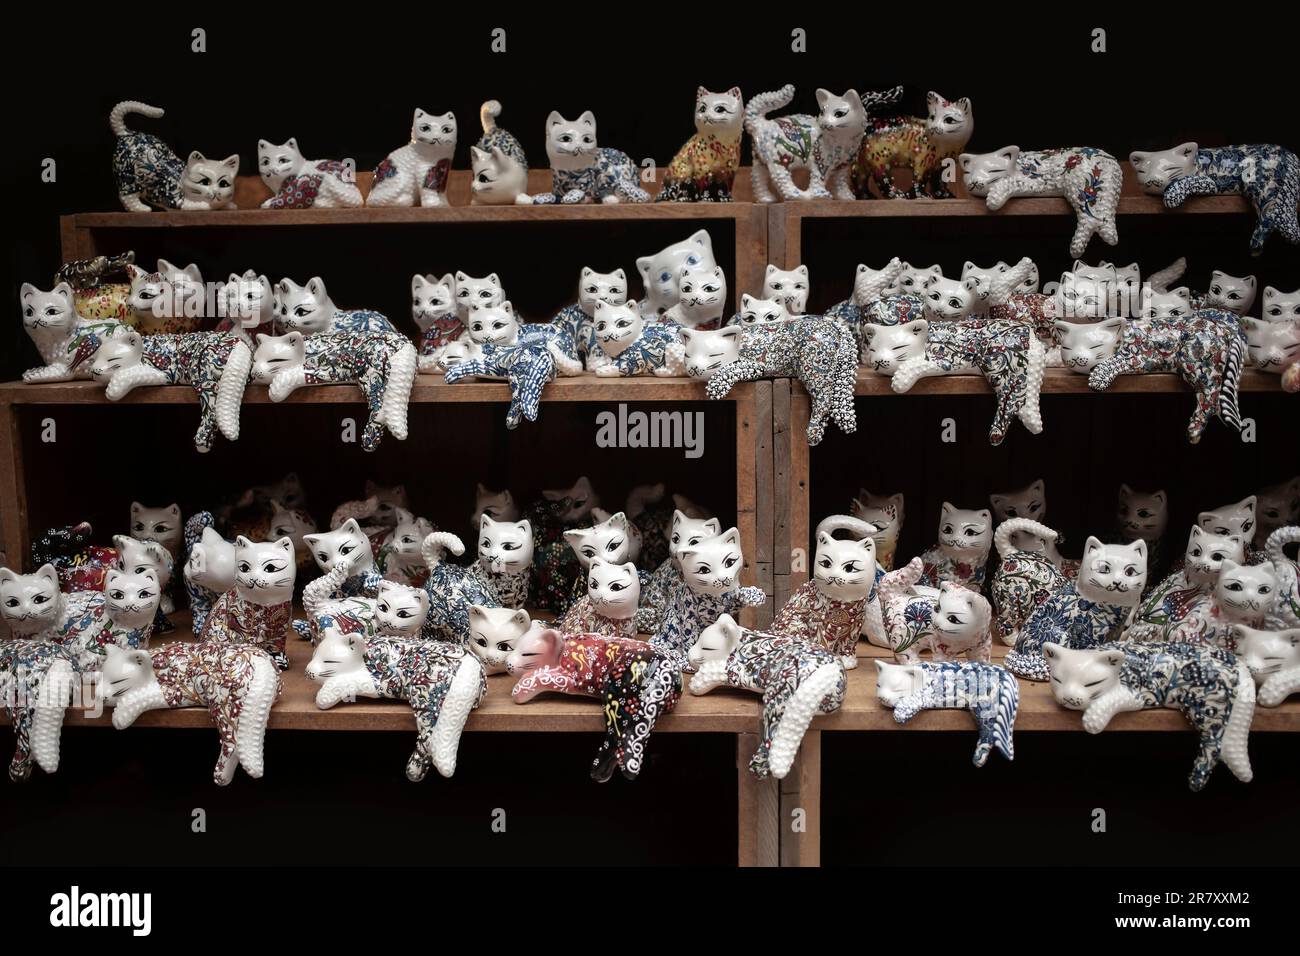 Plenty of porcelain cat figurines lined up on shelves in a gift shop Stock Photo